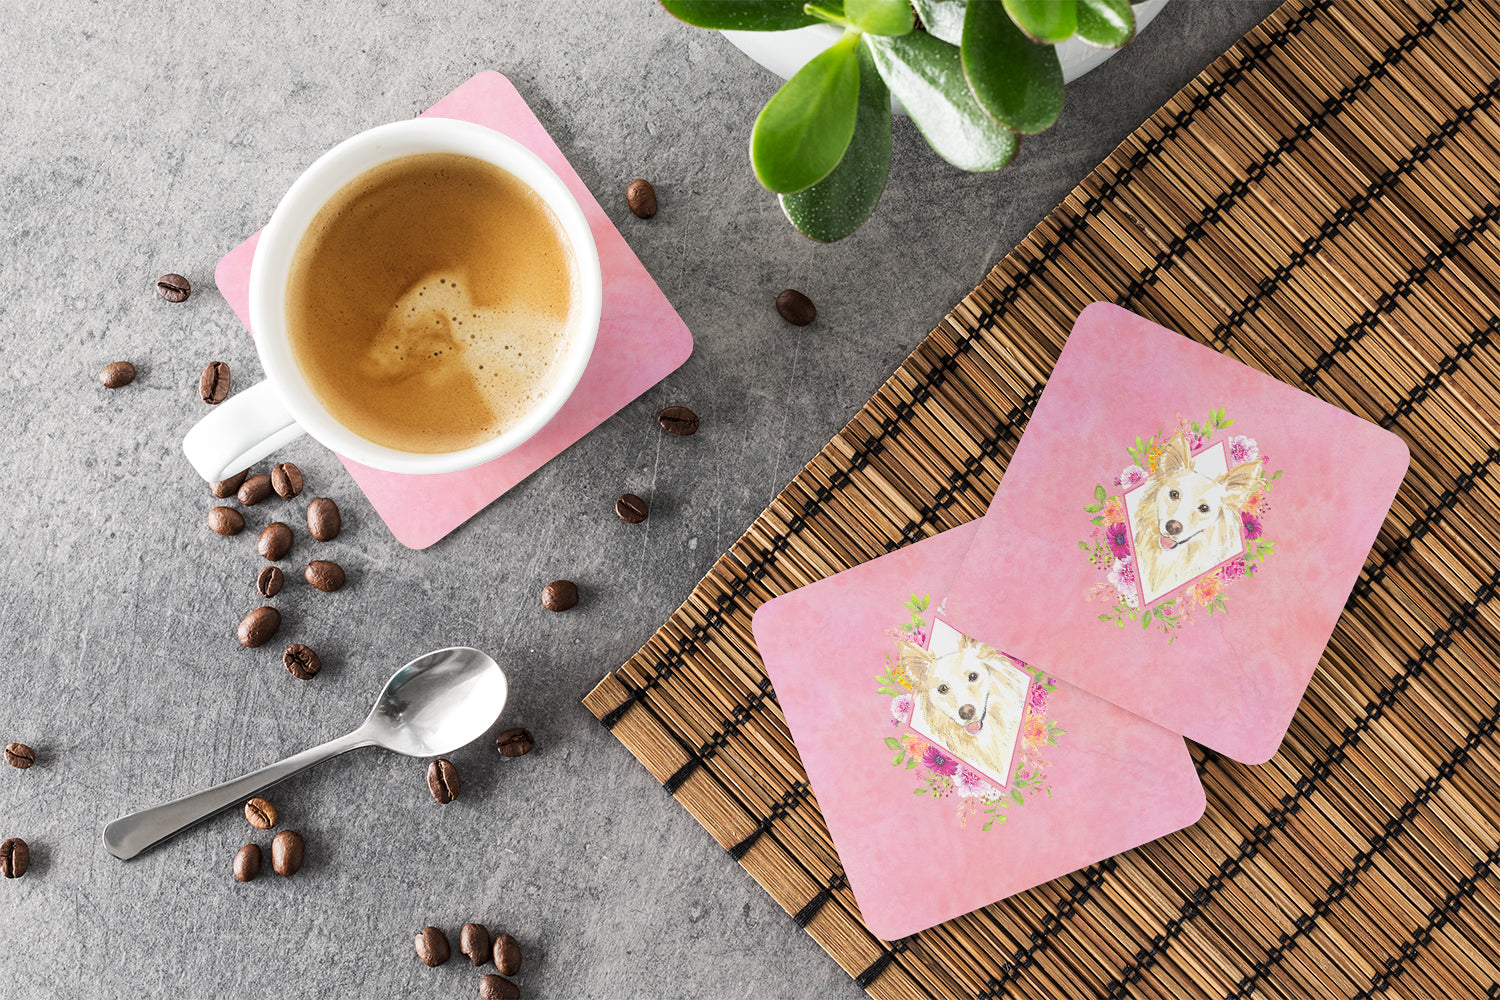 Set of 4  White Collie Pink Flowers Foam Coasters Set of 4 CK4201FC - the-store.com